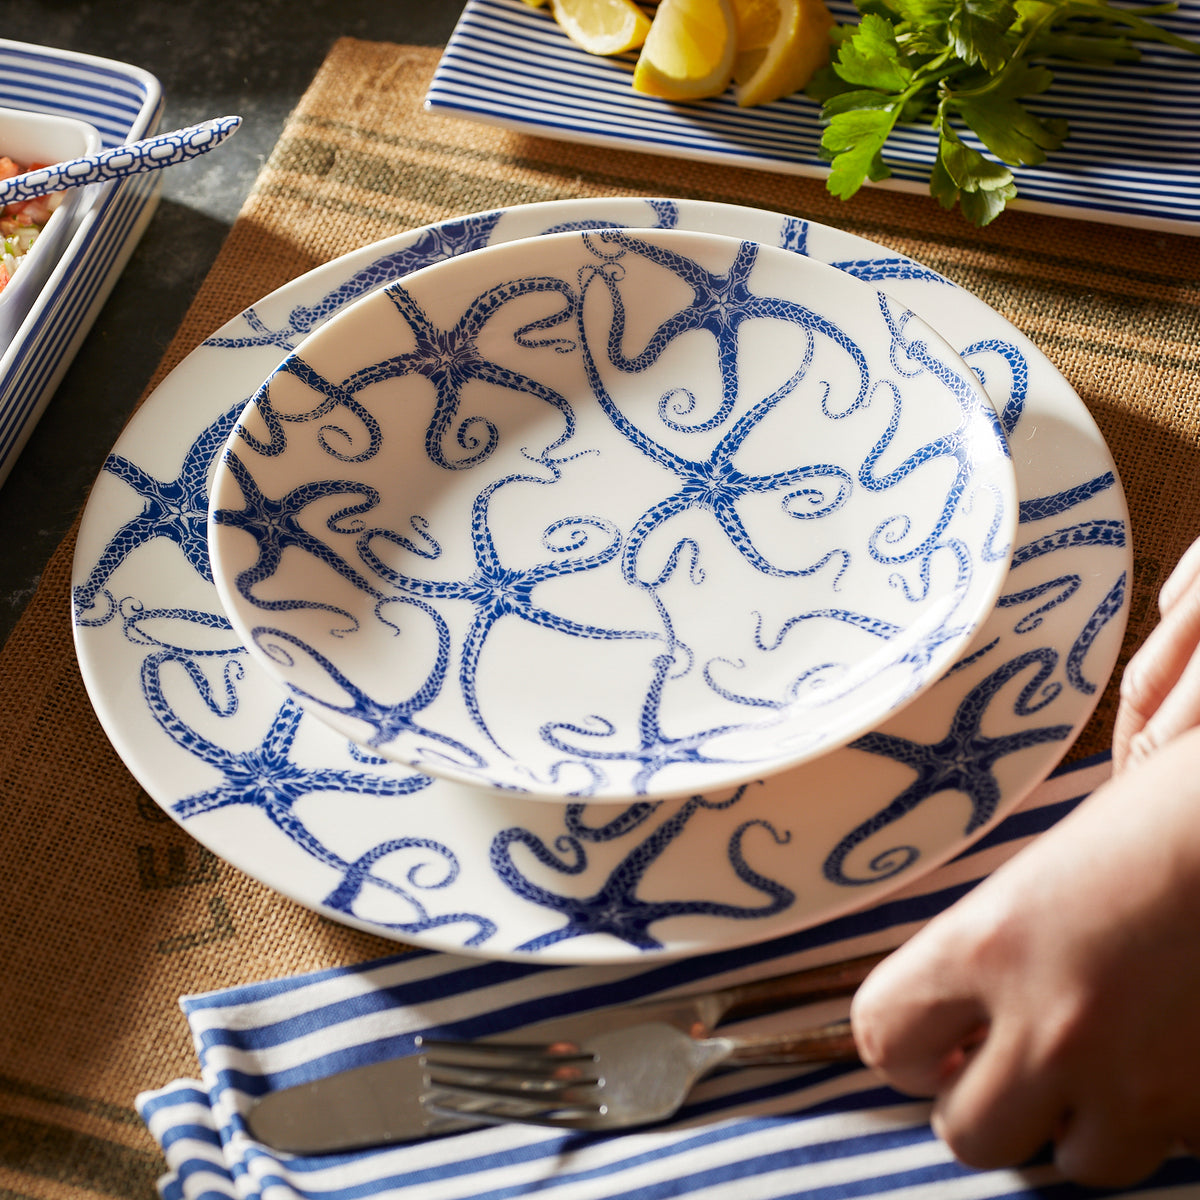 A hand places a fork on a blue and white striped napkin beside the Starfish Coupe Dinner Plate by Caskata Artisanal Home. Parsley and lemon wedges are visible in the background, adding to the contemporary shape of this ocean-inspired dining scene.